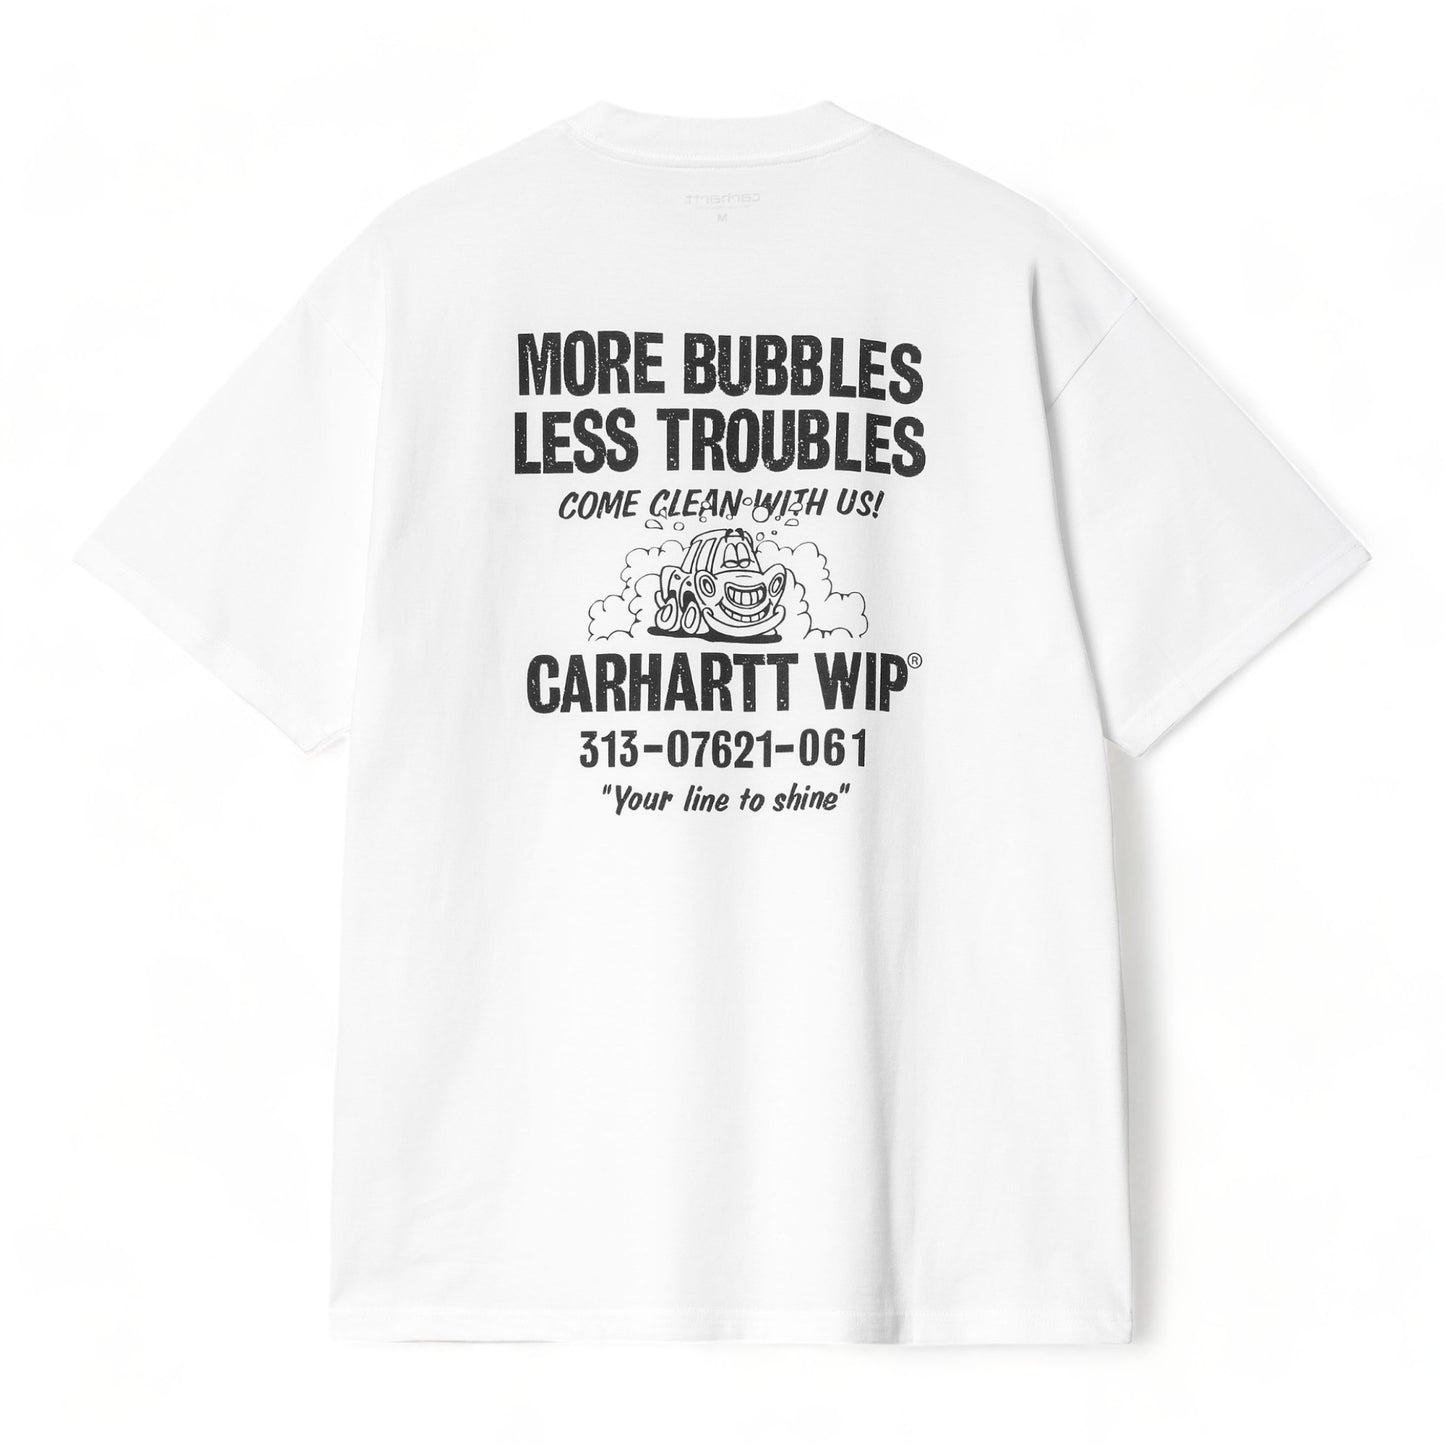 CARHARTT WIP S/S LESS TROUBLES T-SHIRT